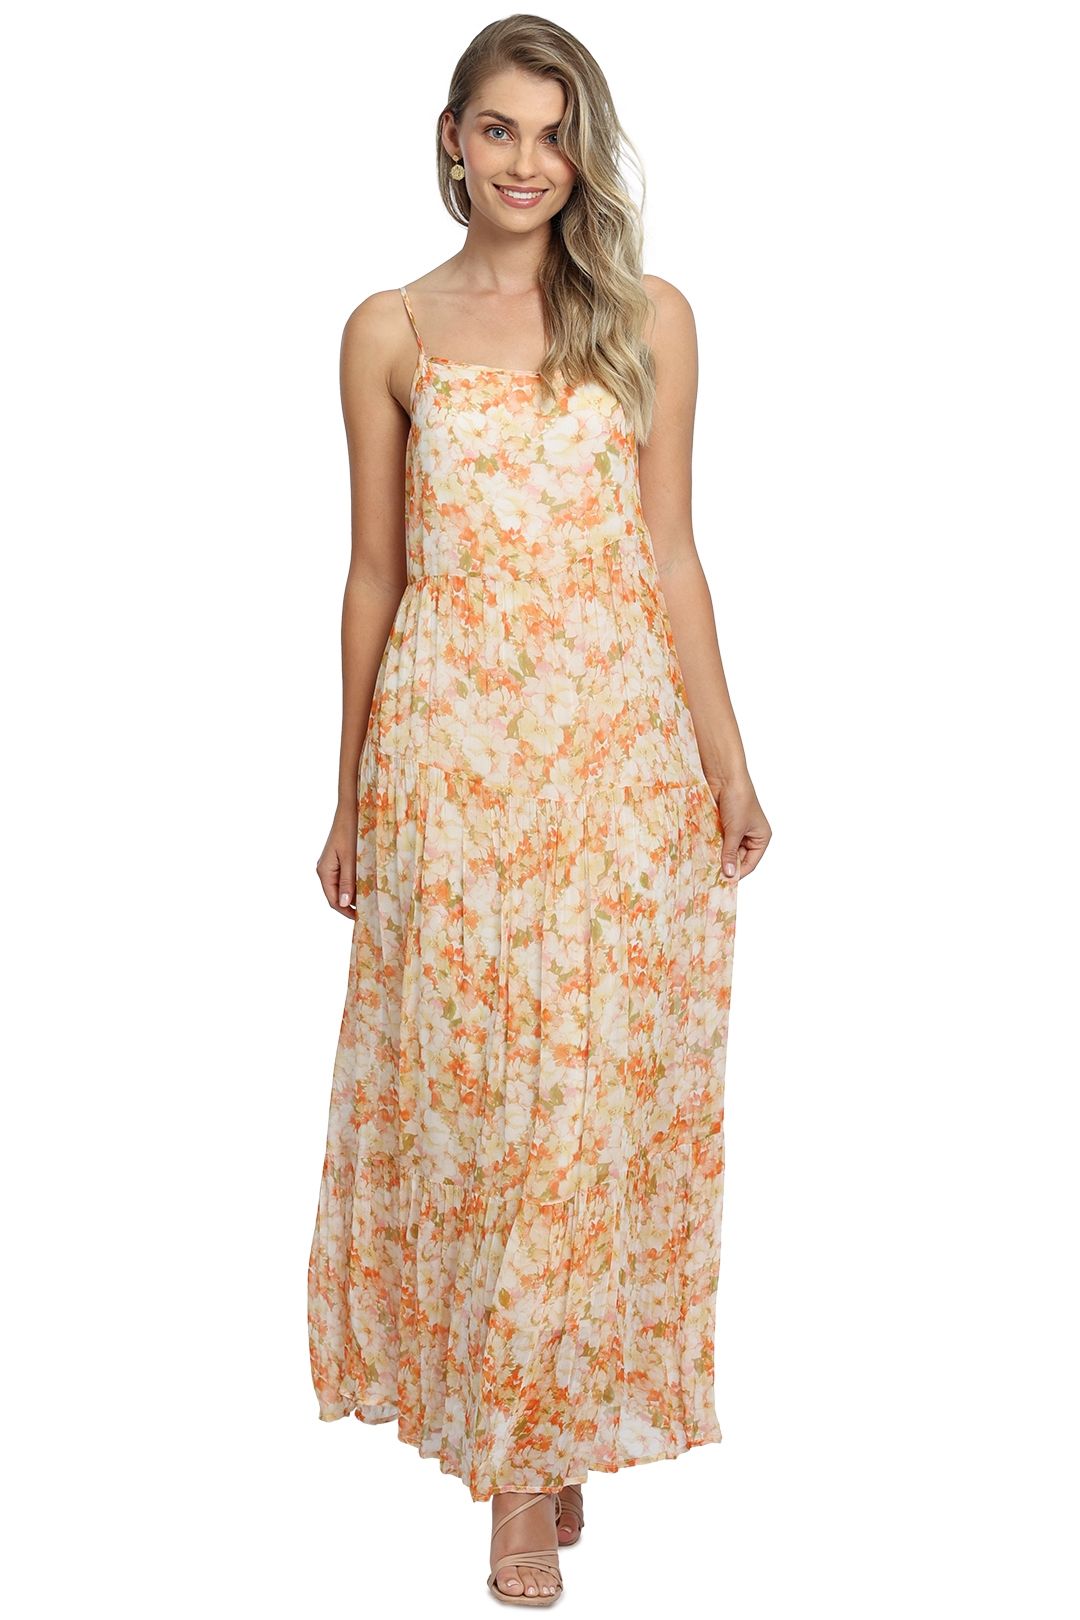 Ministry of Style Spring Meadows Maxi Dress floral